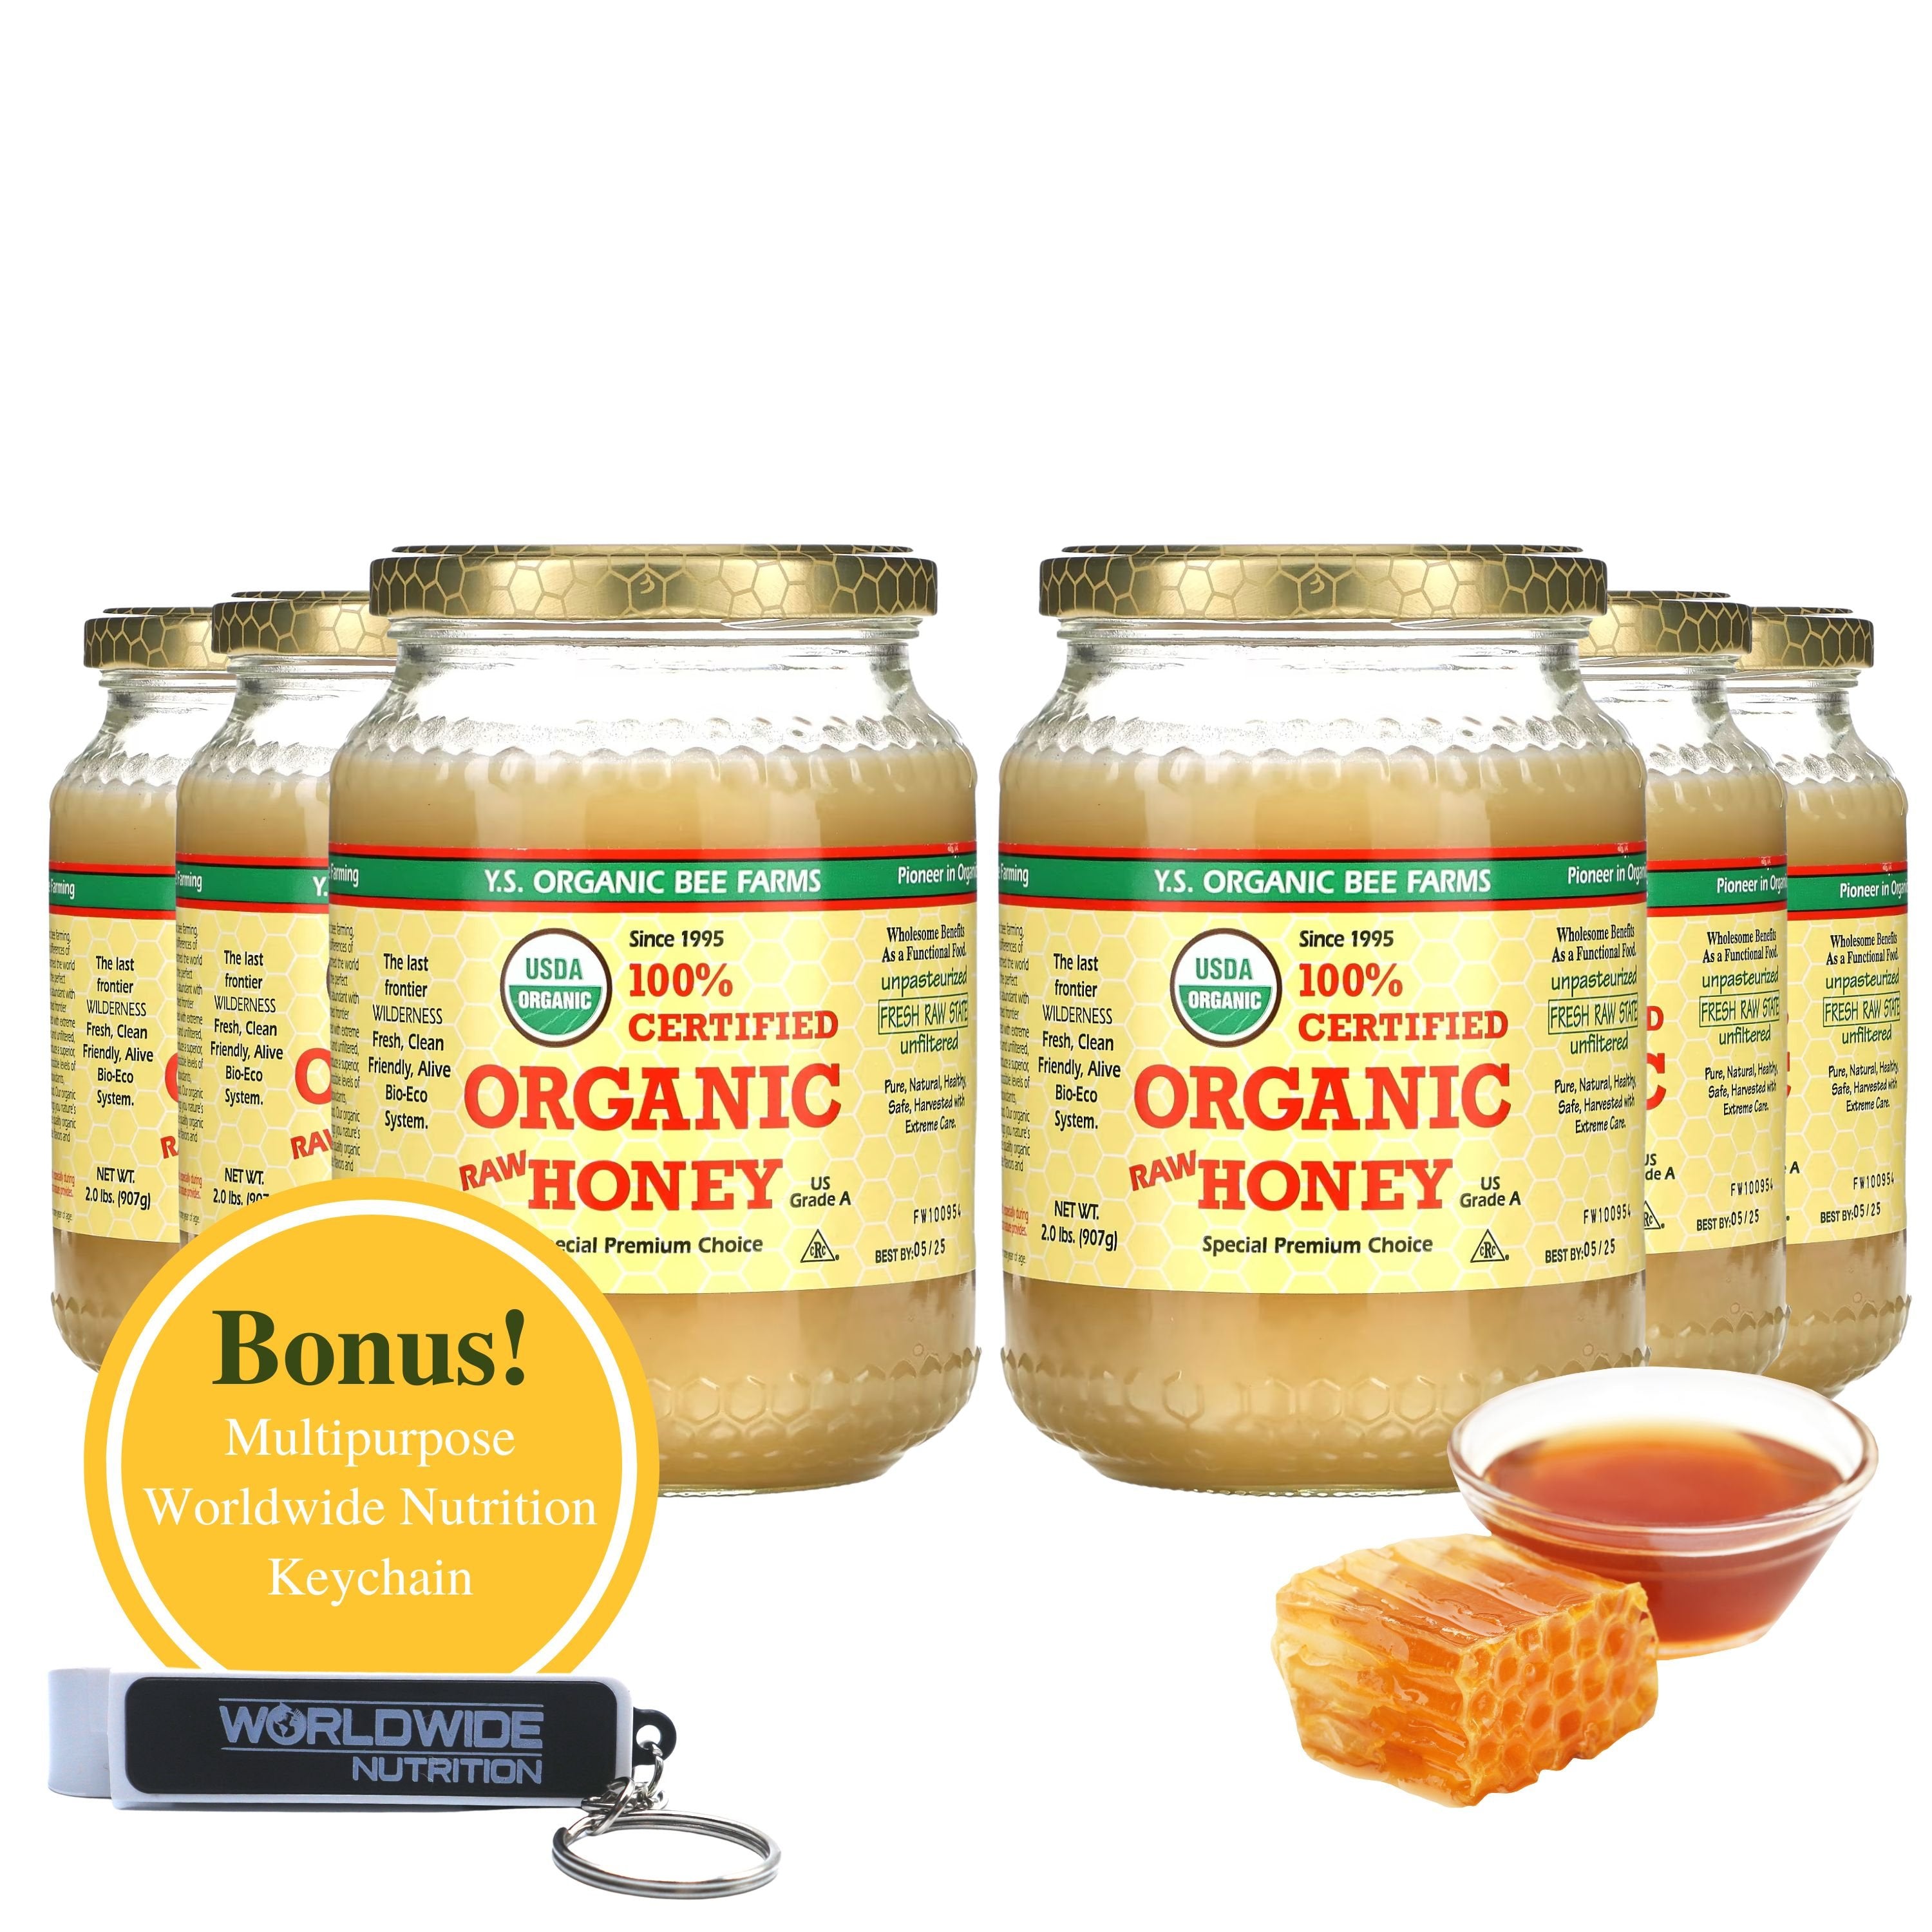 Y.S. Organic Bee Farms, 100% Certified Y.S. Organic Raw Honey, Unpasteurized, Unfiltered, Fresh Raw State, Kosher, Pure, Natural, Healthy, Safe, Gluten Free, Harvested with Extreme Care, 2 Lb (6)